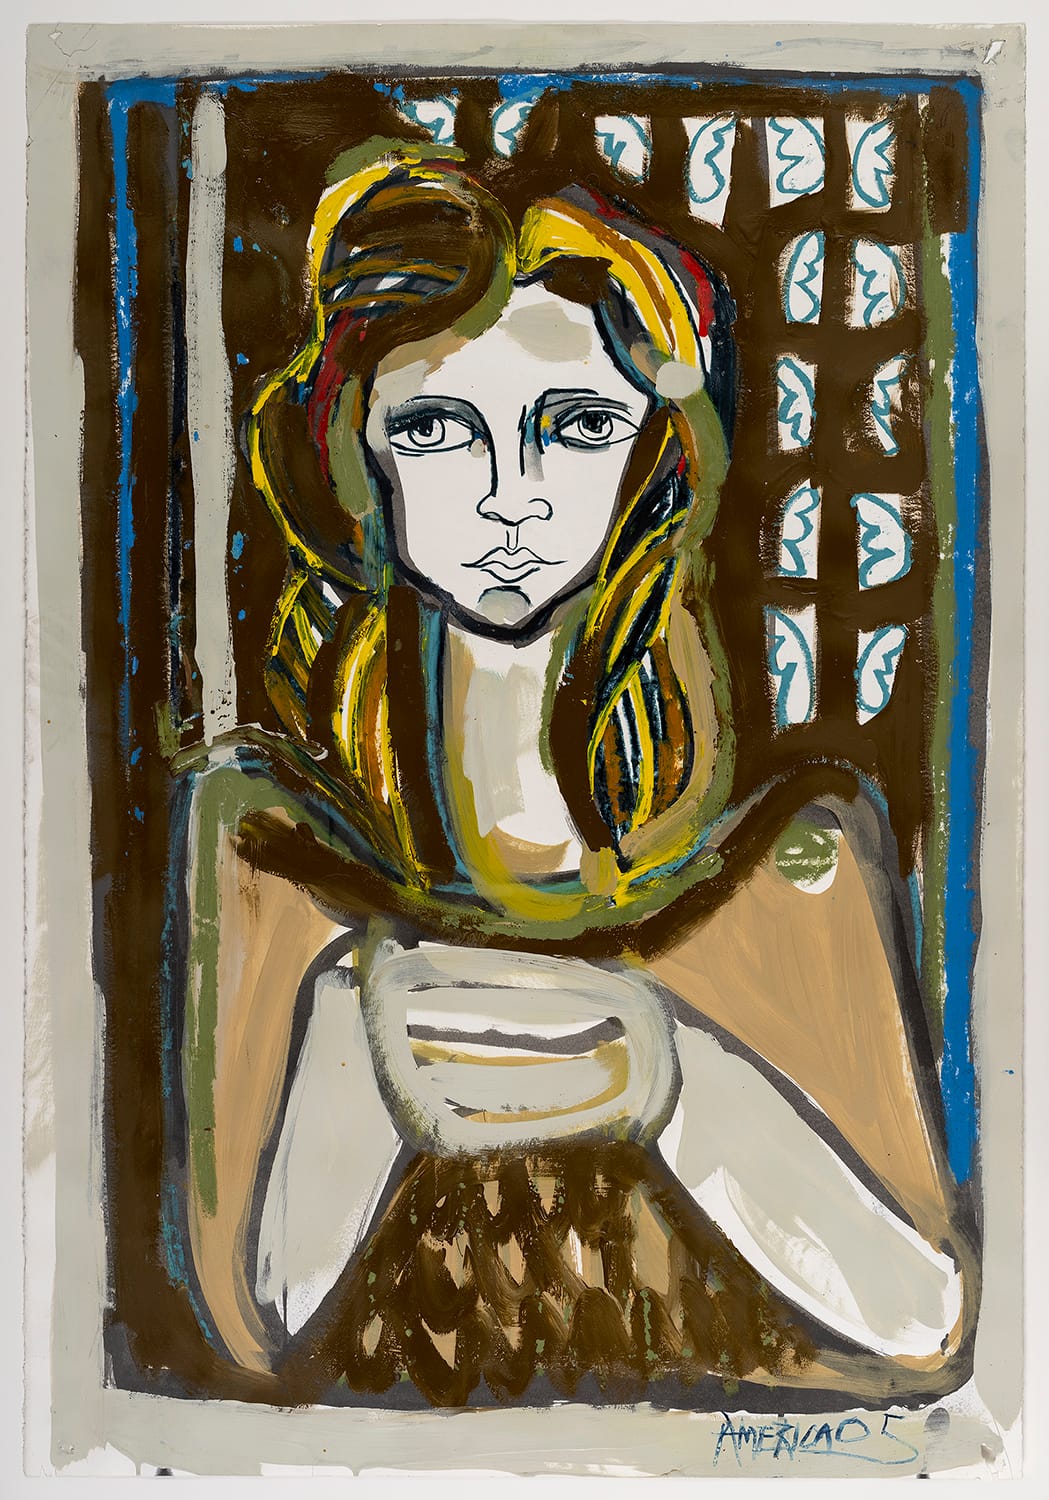 Woman in Brown and Cream_America Martin_Oil Pastel, Ink and Acrylic on Cotton Paper_44 x 30.25